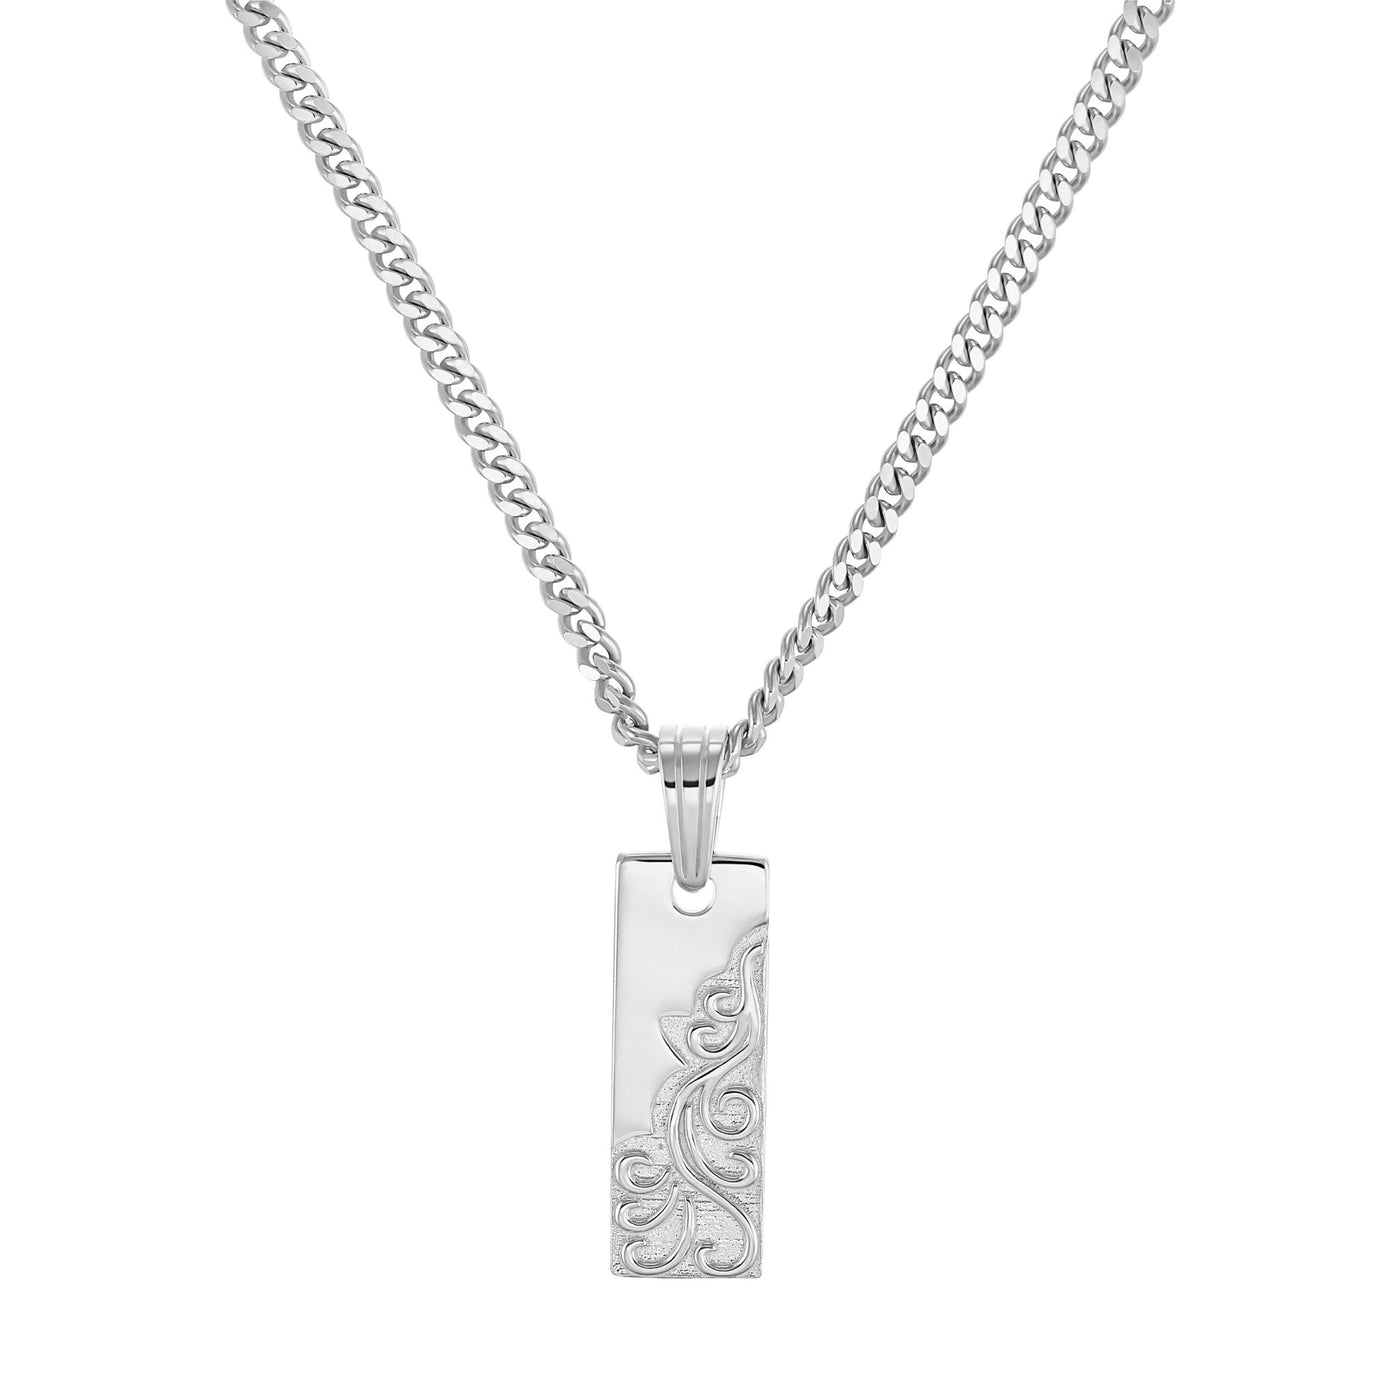 PLATE NECKLACE 925 SILVER RHODIUM PLATED - IDENTIM®